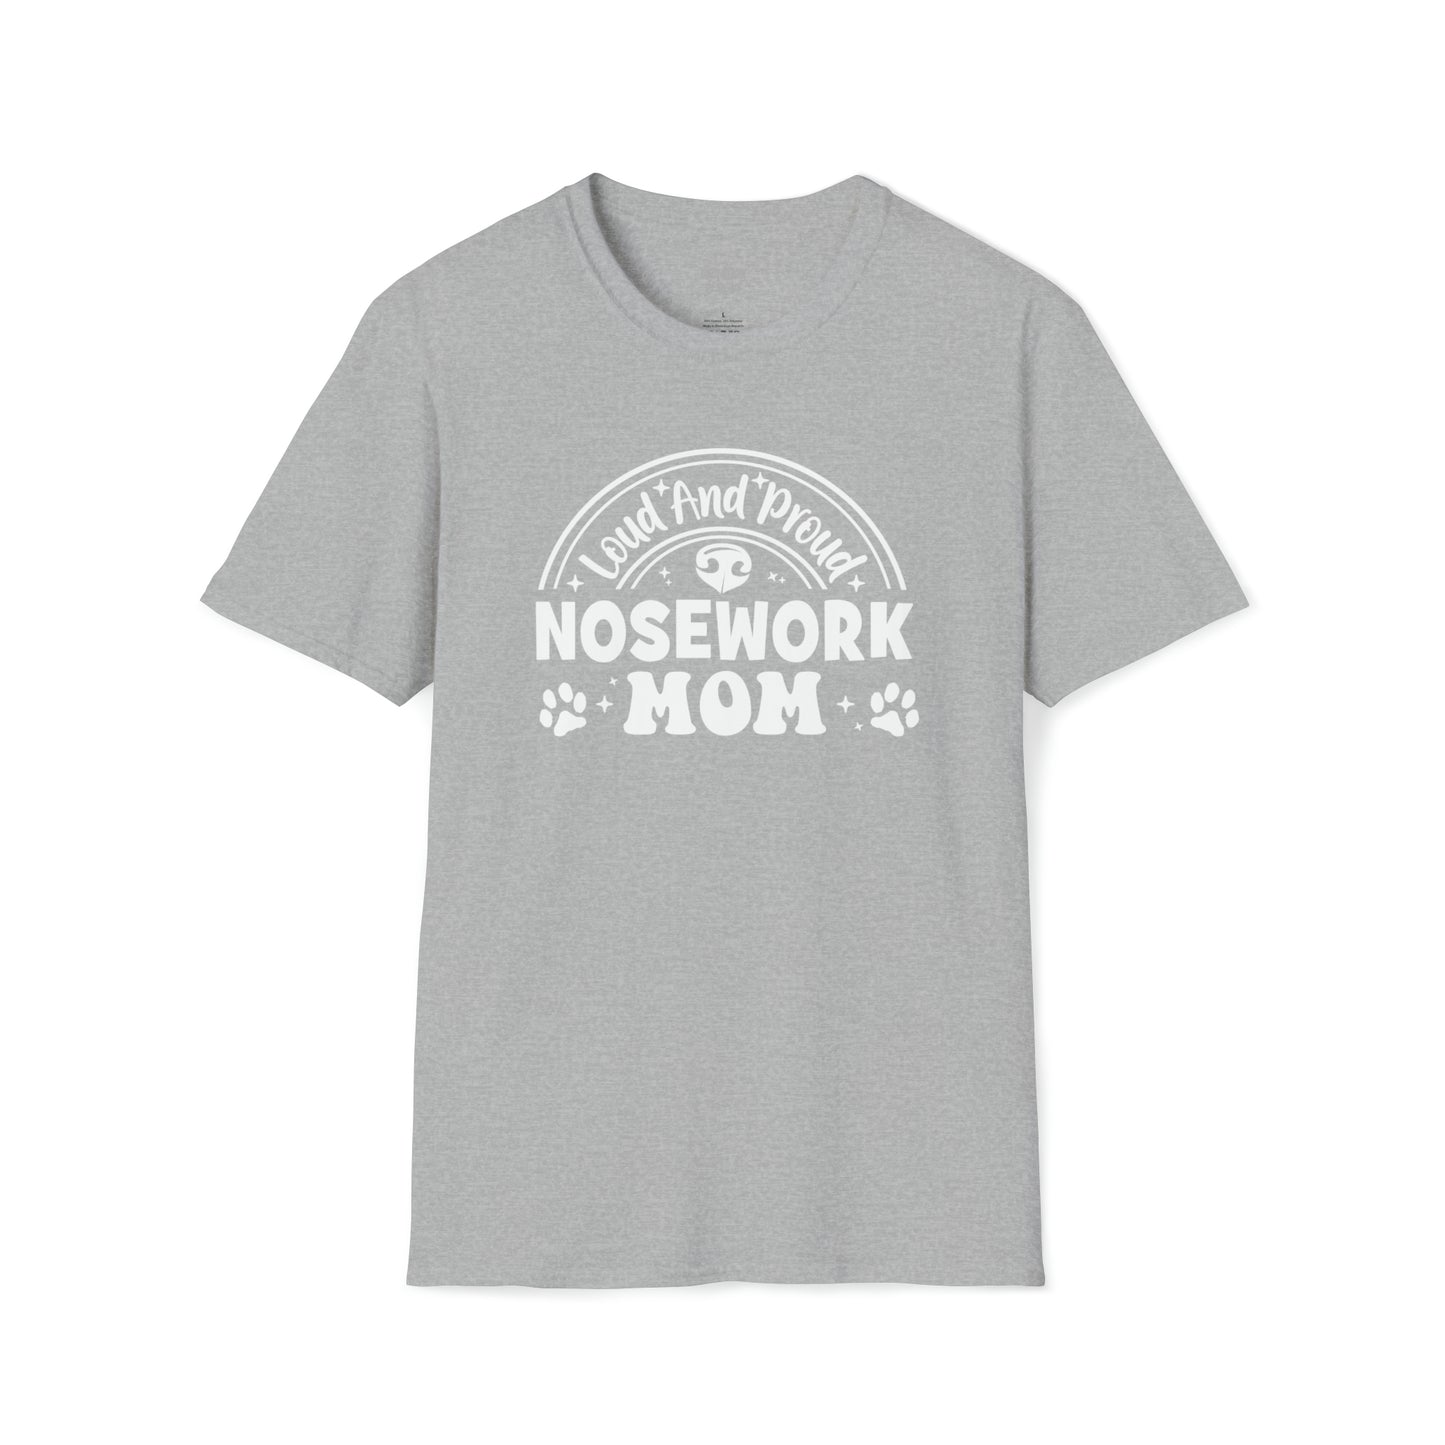 LOUD PROUD NOSEWORK MOM -  Unisex Softstyle T-Shirt